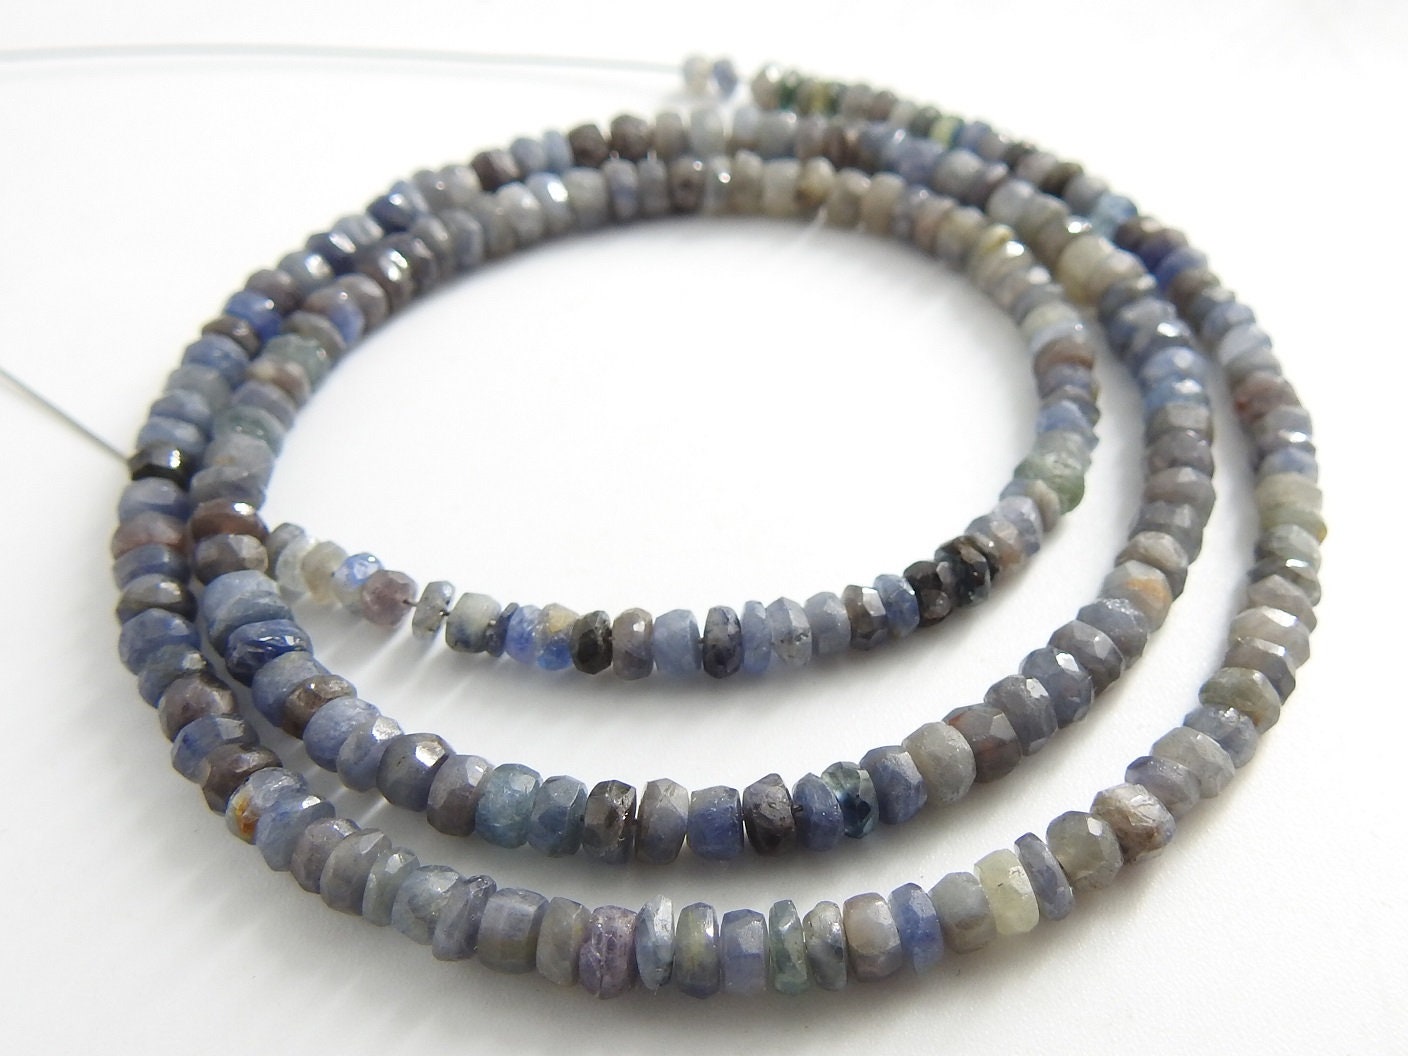 Blue Sapphire Faceted Roundel Bead,Multi Shaded,Burma Mines,Loose Stone,Handmade,For Jewelry Makers,16Inch Strand,100%Natural PMEB-13 | Save 33% - Rajasthan Living 24